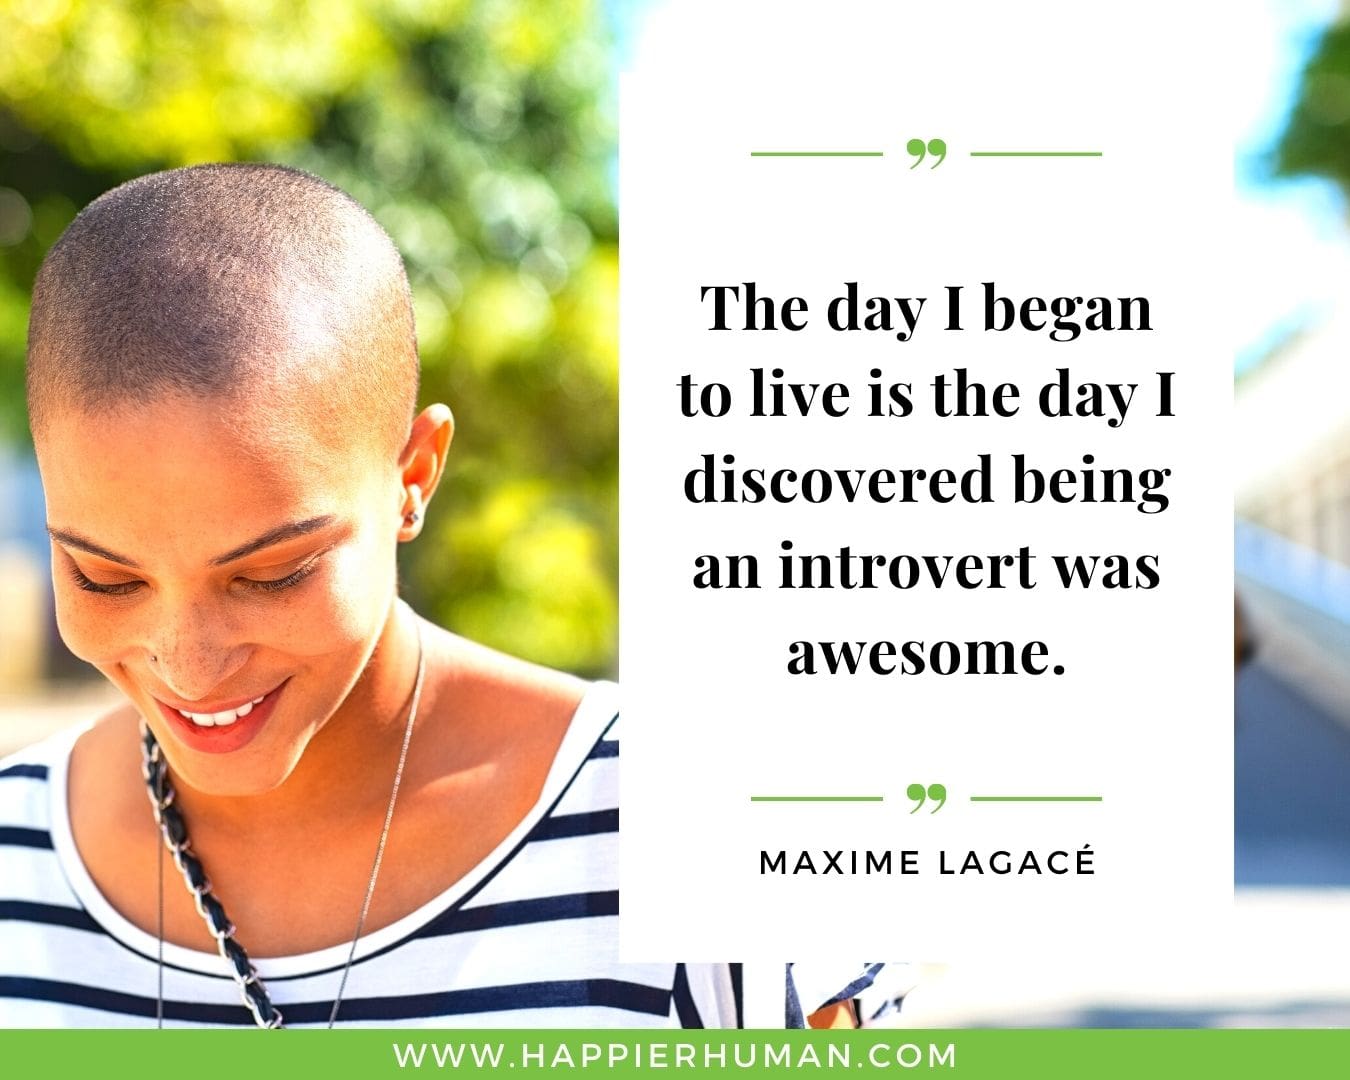 Introvert Quotes - “The day I began to live is the day I discovered being an introvert was awesome.” – Maxime Lagacé